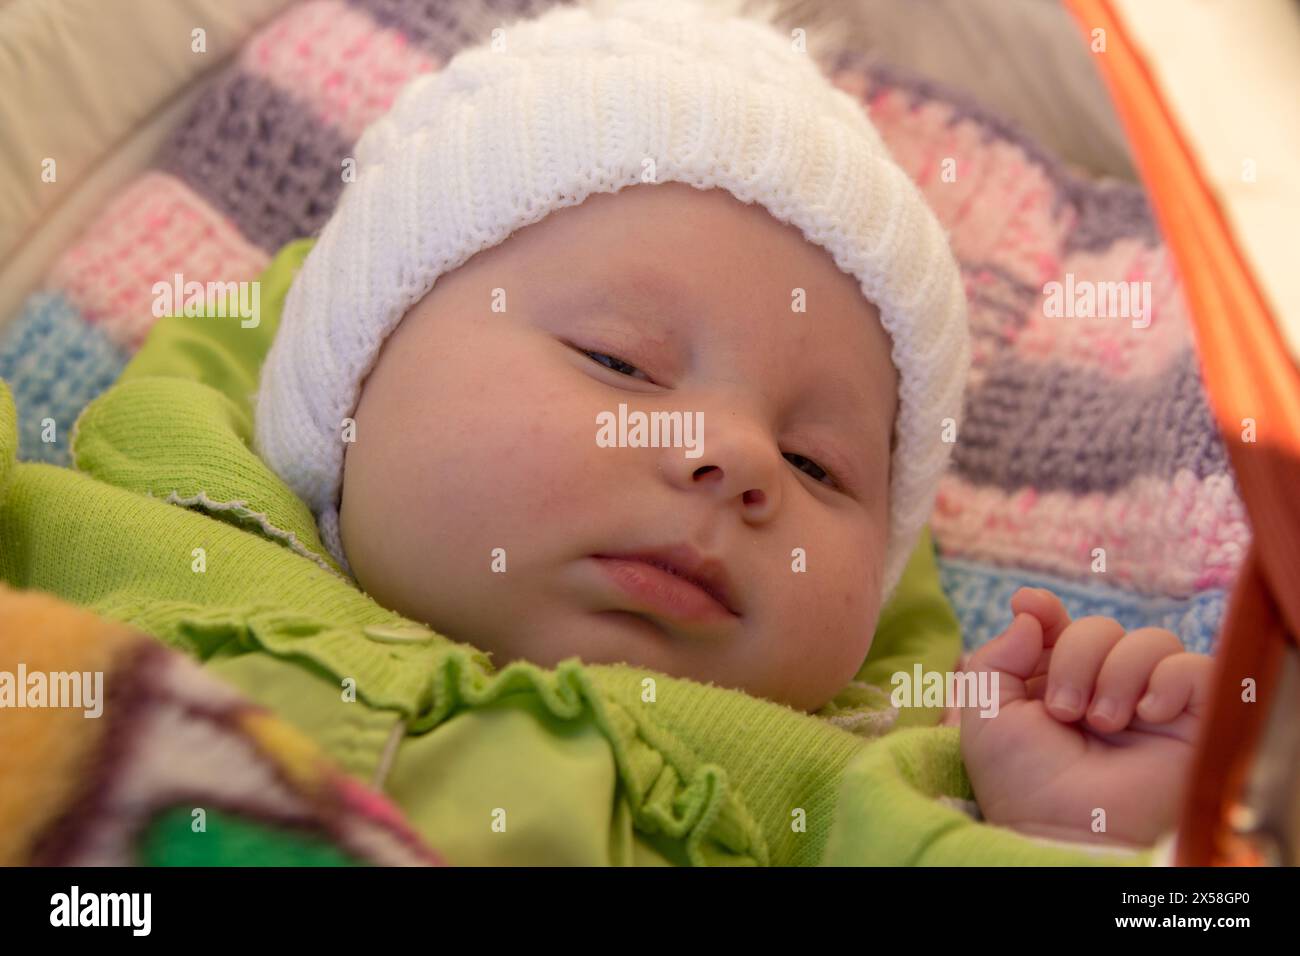 dreaming sweet dream of a newborn baby in a carriage in sunlight Stock Photo